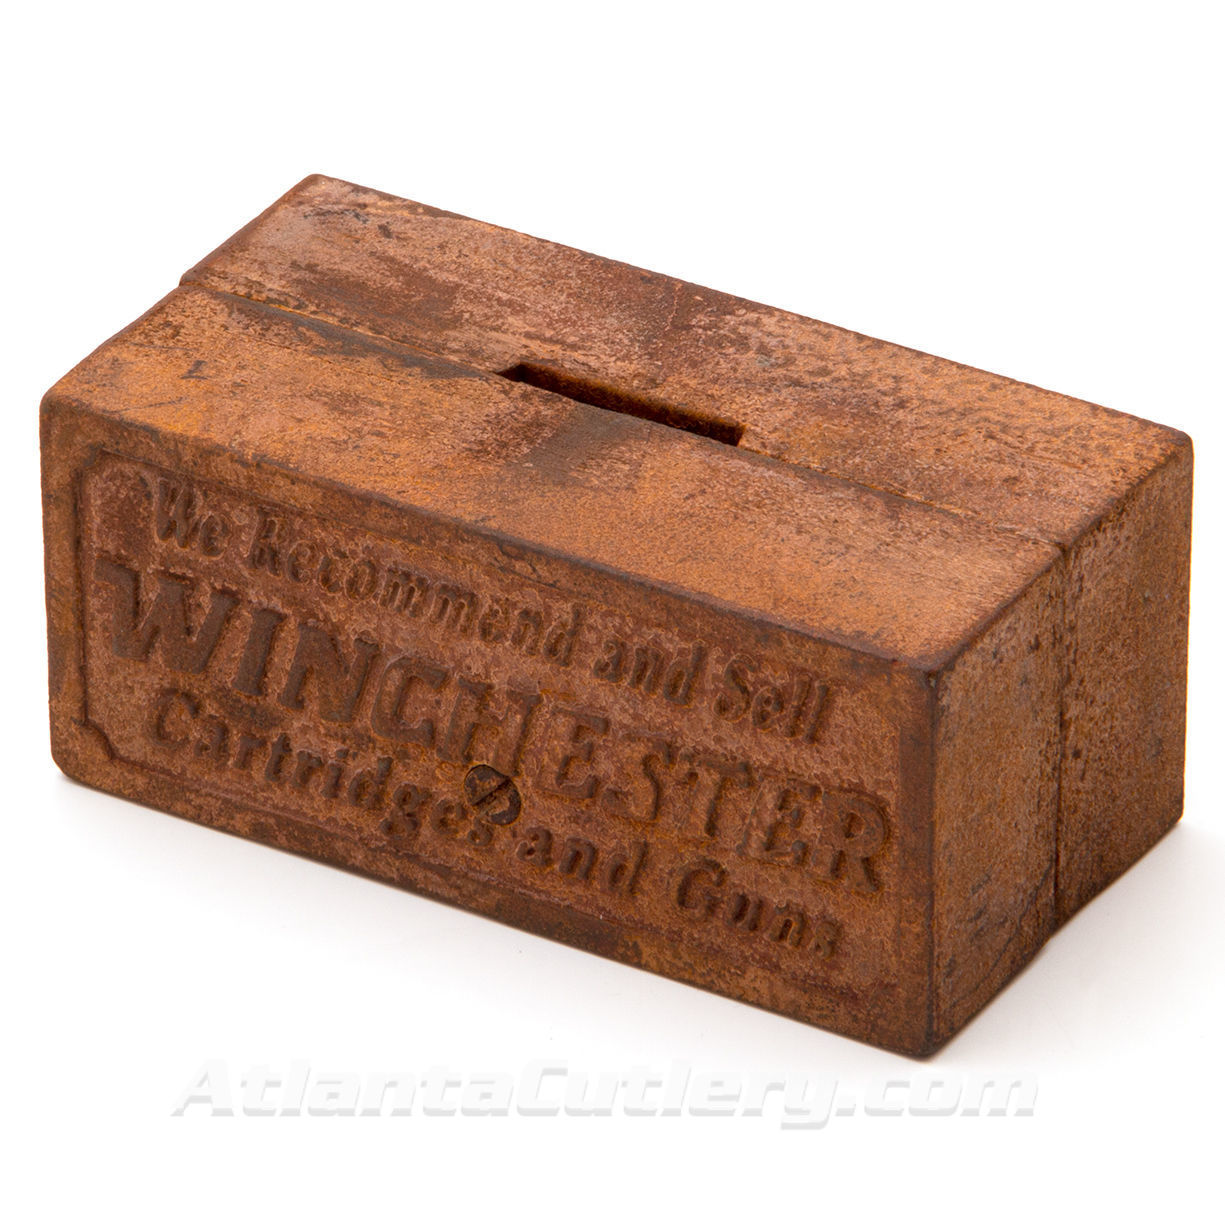 Each side of replica Winchester Cast Iron Bank has “We Recommend and Sell WINCHESTER Cartridges and Guns” in raised lettering